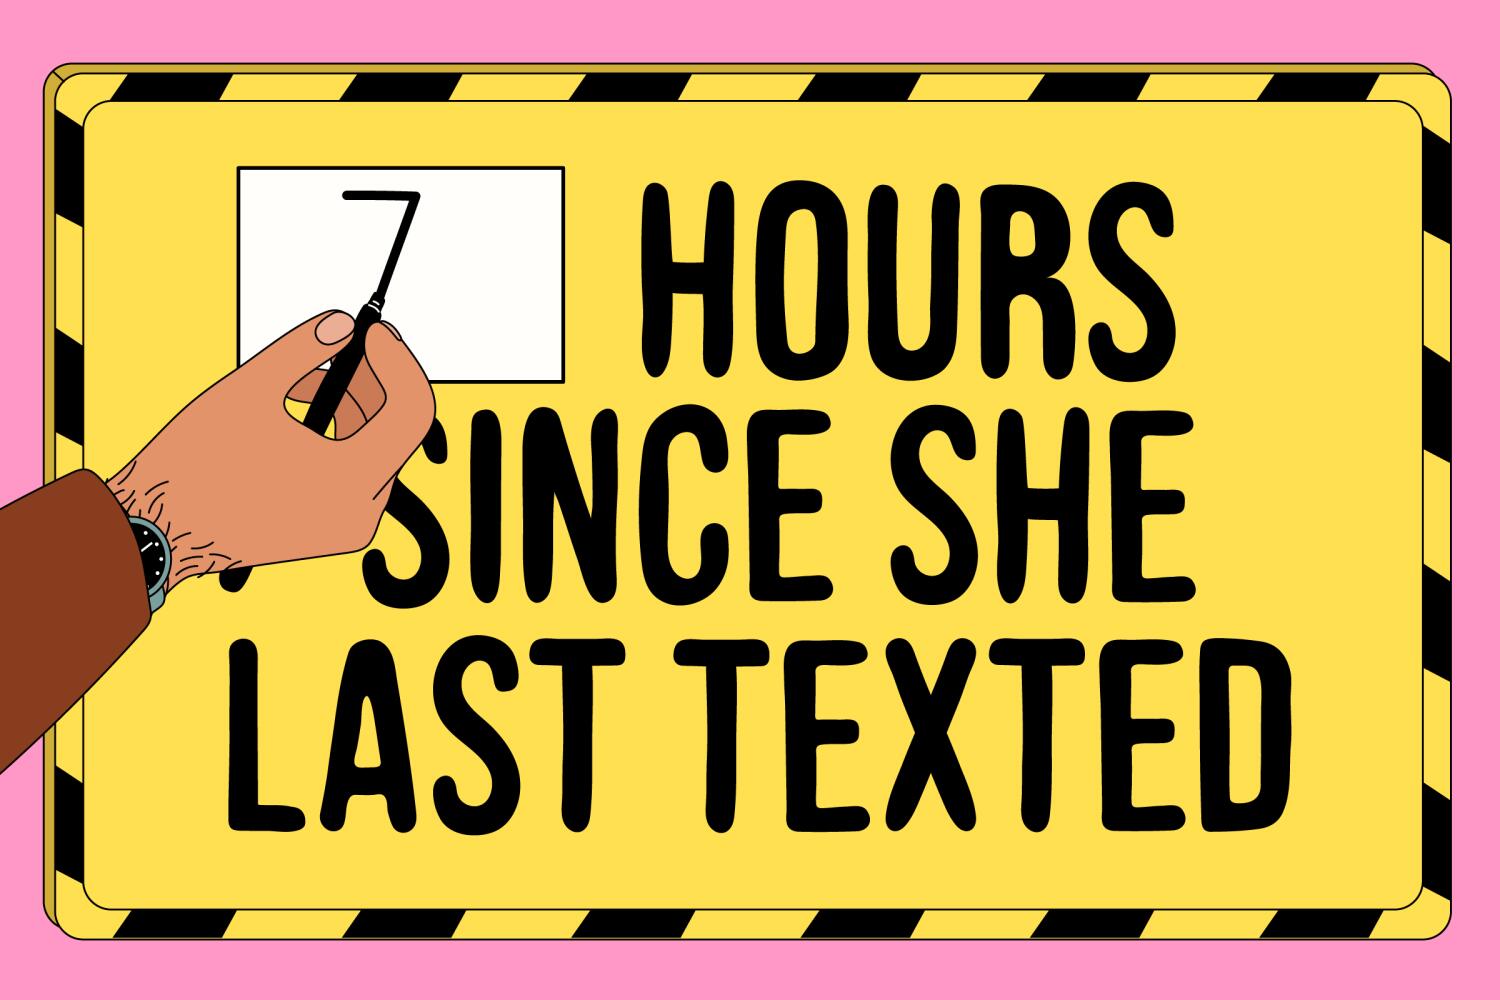 Do you hate your crush's texting habits? Consider this before calling it quits